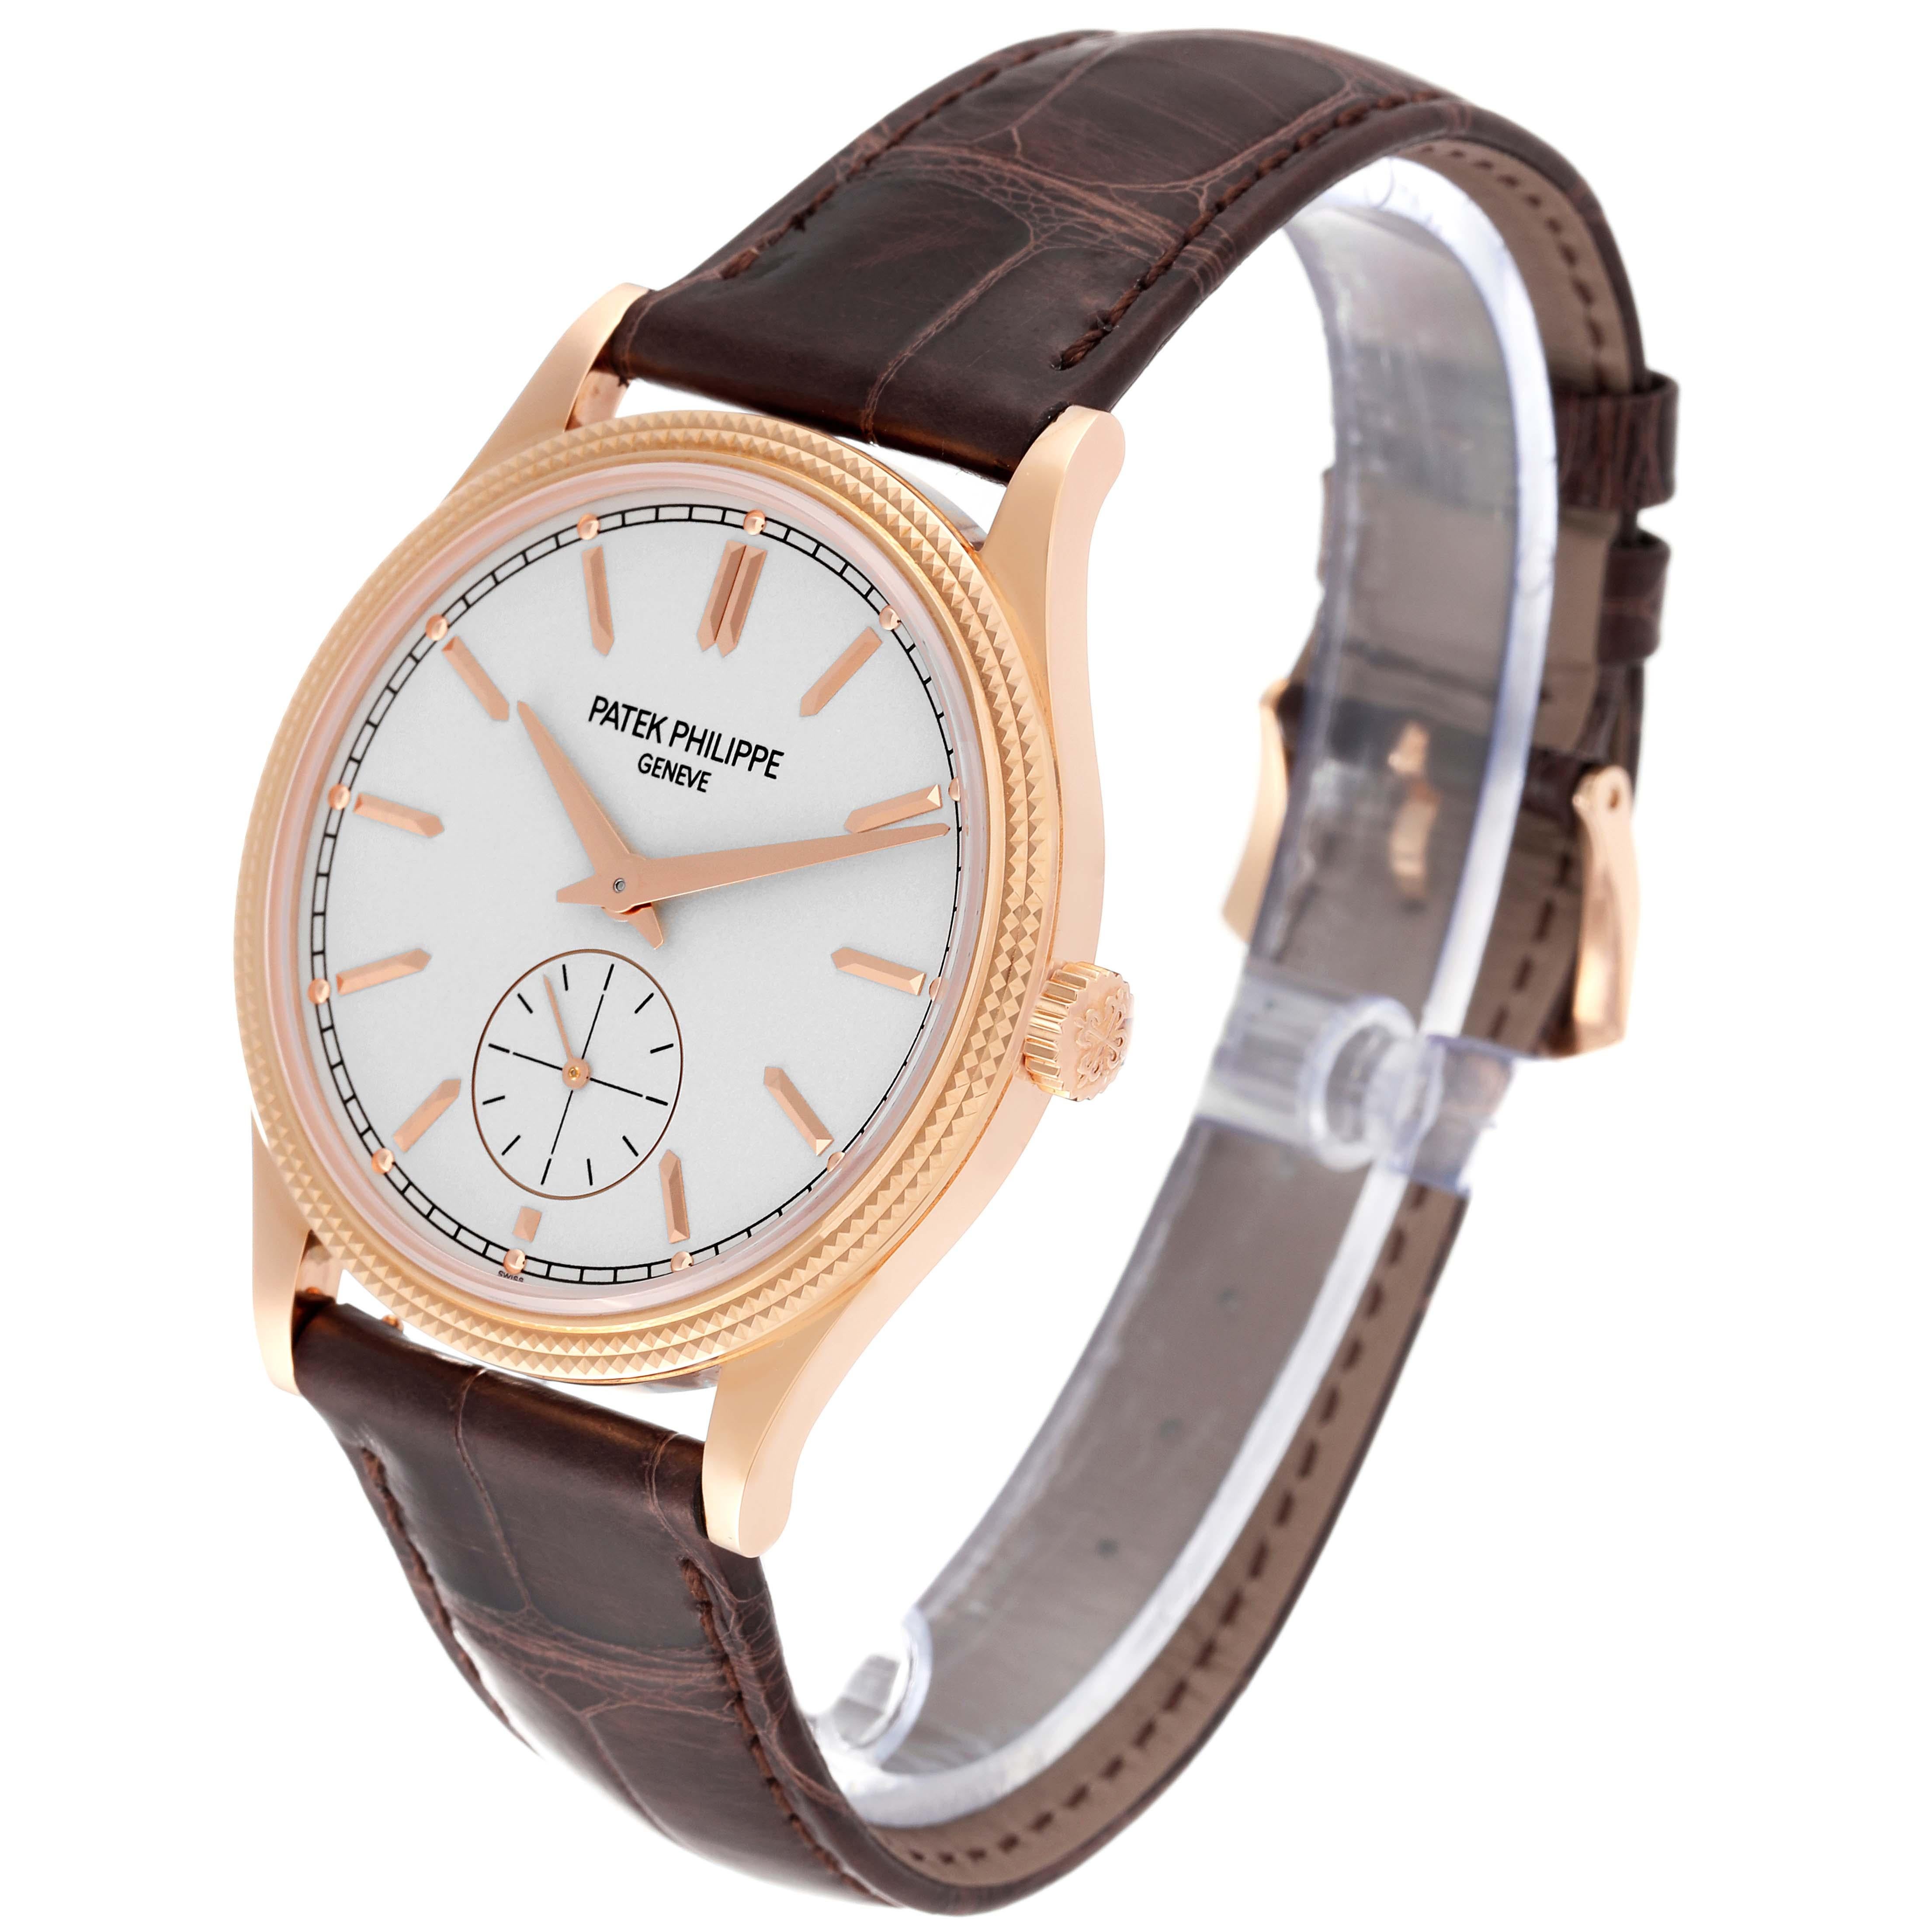 Patek Philippe Calatrava Rose Gold Brown Strap Mens Watch 6119 Box Papers. Manual winding movement. 18k rose gold case 39.0 mm in diameter. Case thickness -- 8.08 mm. Transparent exhibition sapphire crystal caseback. 18k rose gold bezel guilloched